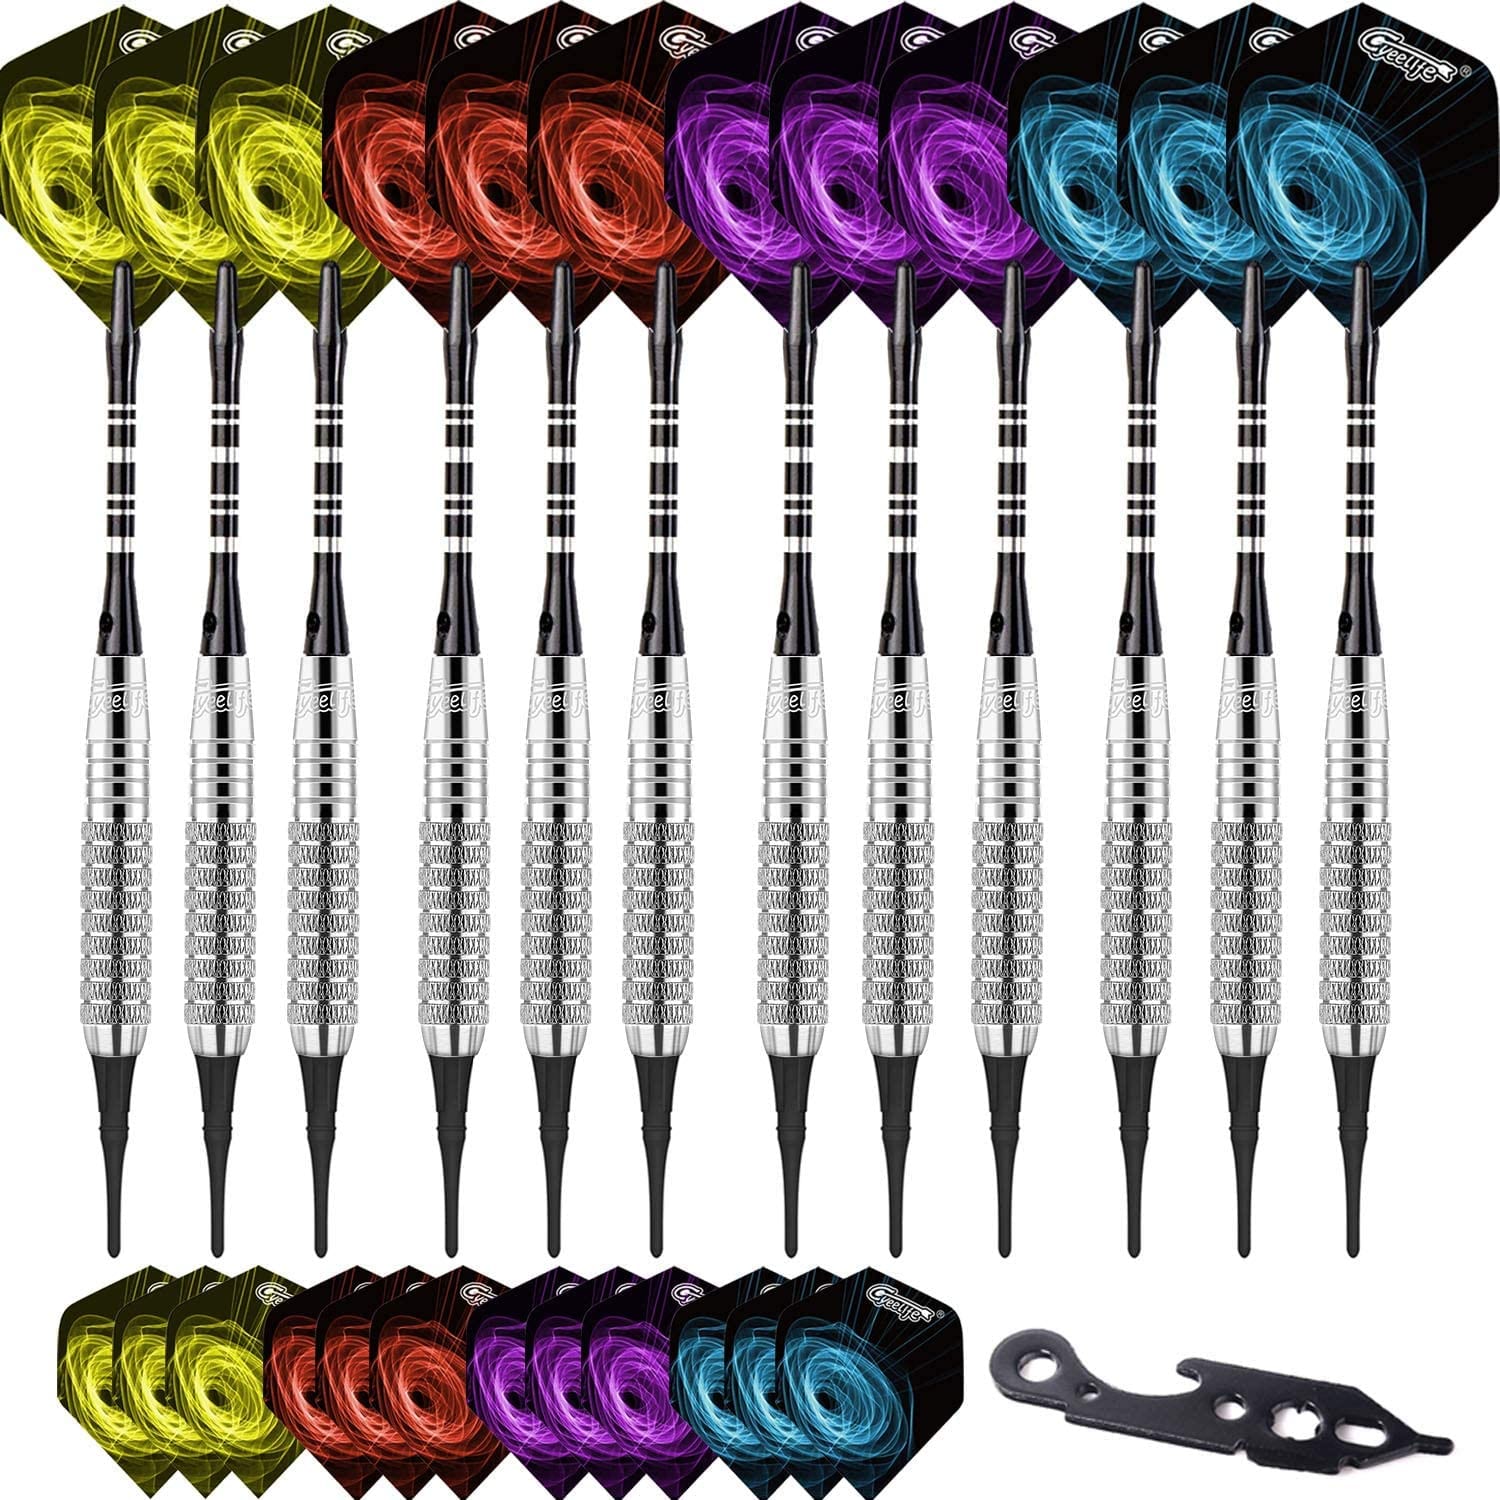 CyeeLife Soft tip Darts 17g+100Tips+Tool+24Flights+12Aluminum shafts with Rubber Rings Gift Box Packaging Sliver/Black